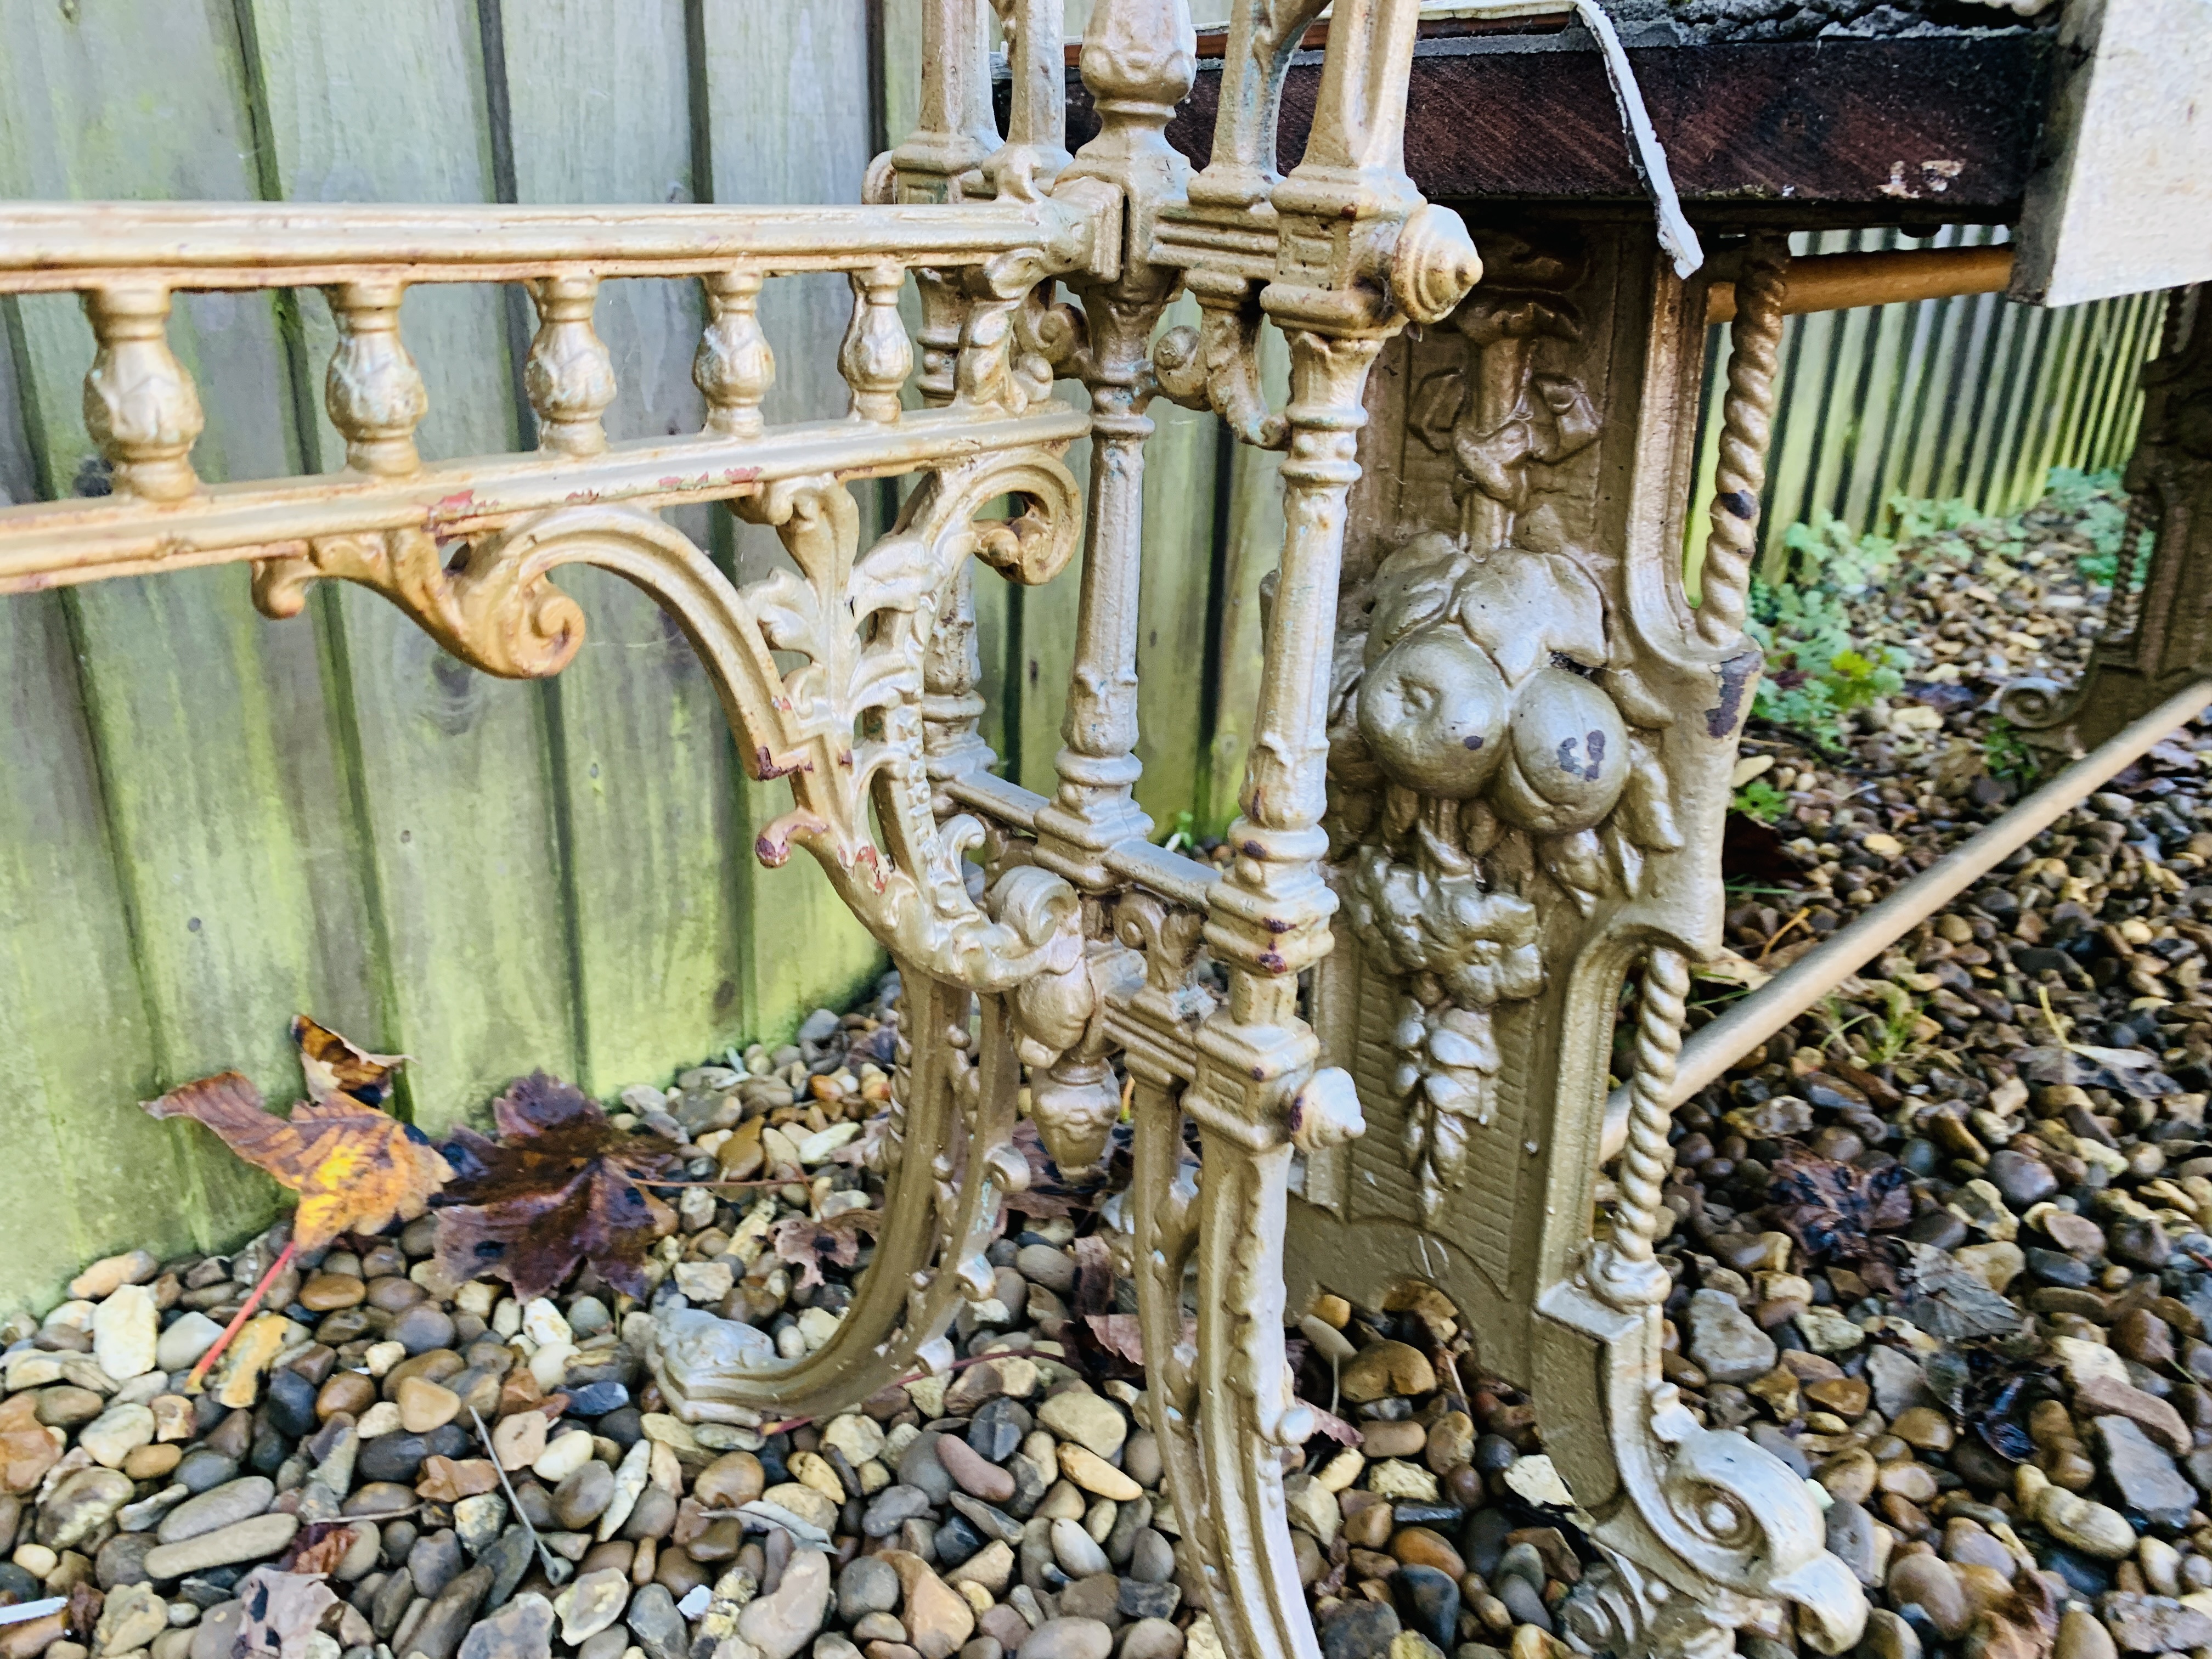 SET OF FOUR DECORATIVE CAST ALUMINIUM GARDEN CHAIRS ALONG WITH DECORATIVE CAST IRON TABLE BASE A/F - Image 6 of 12